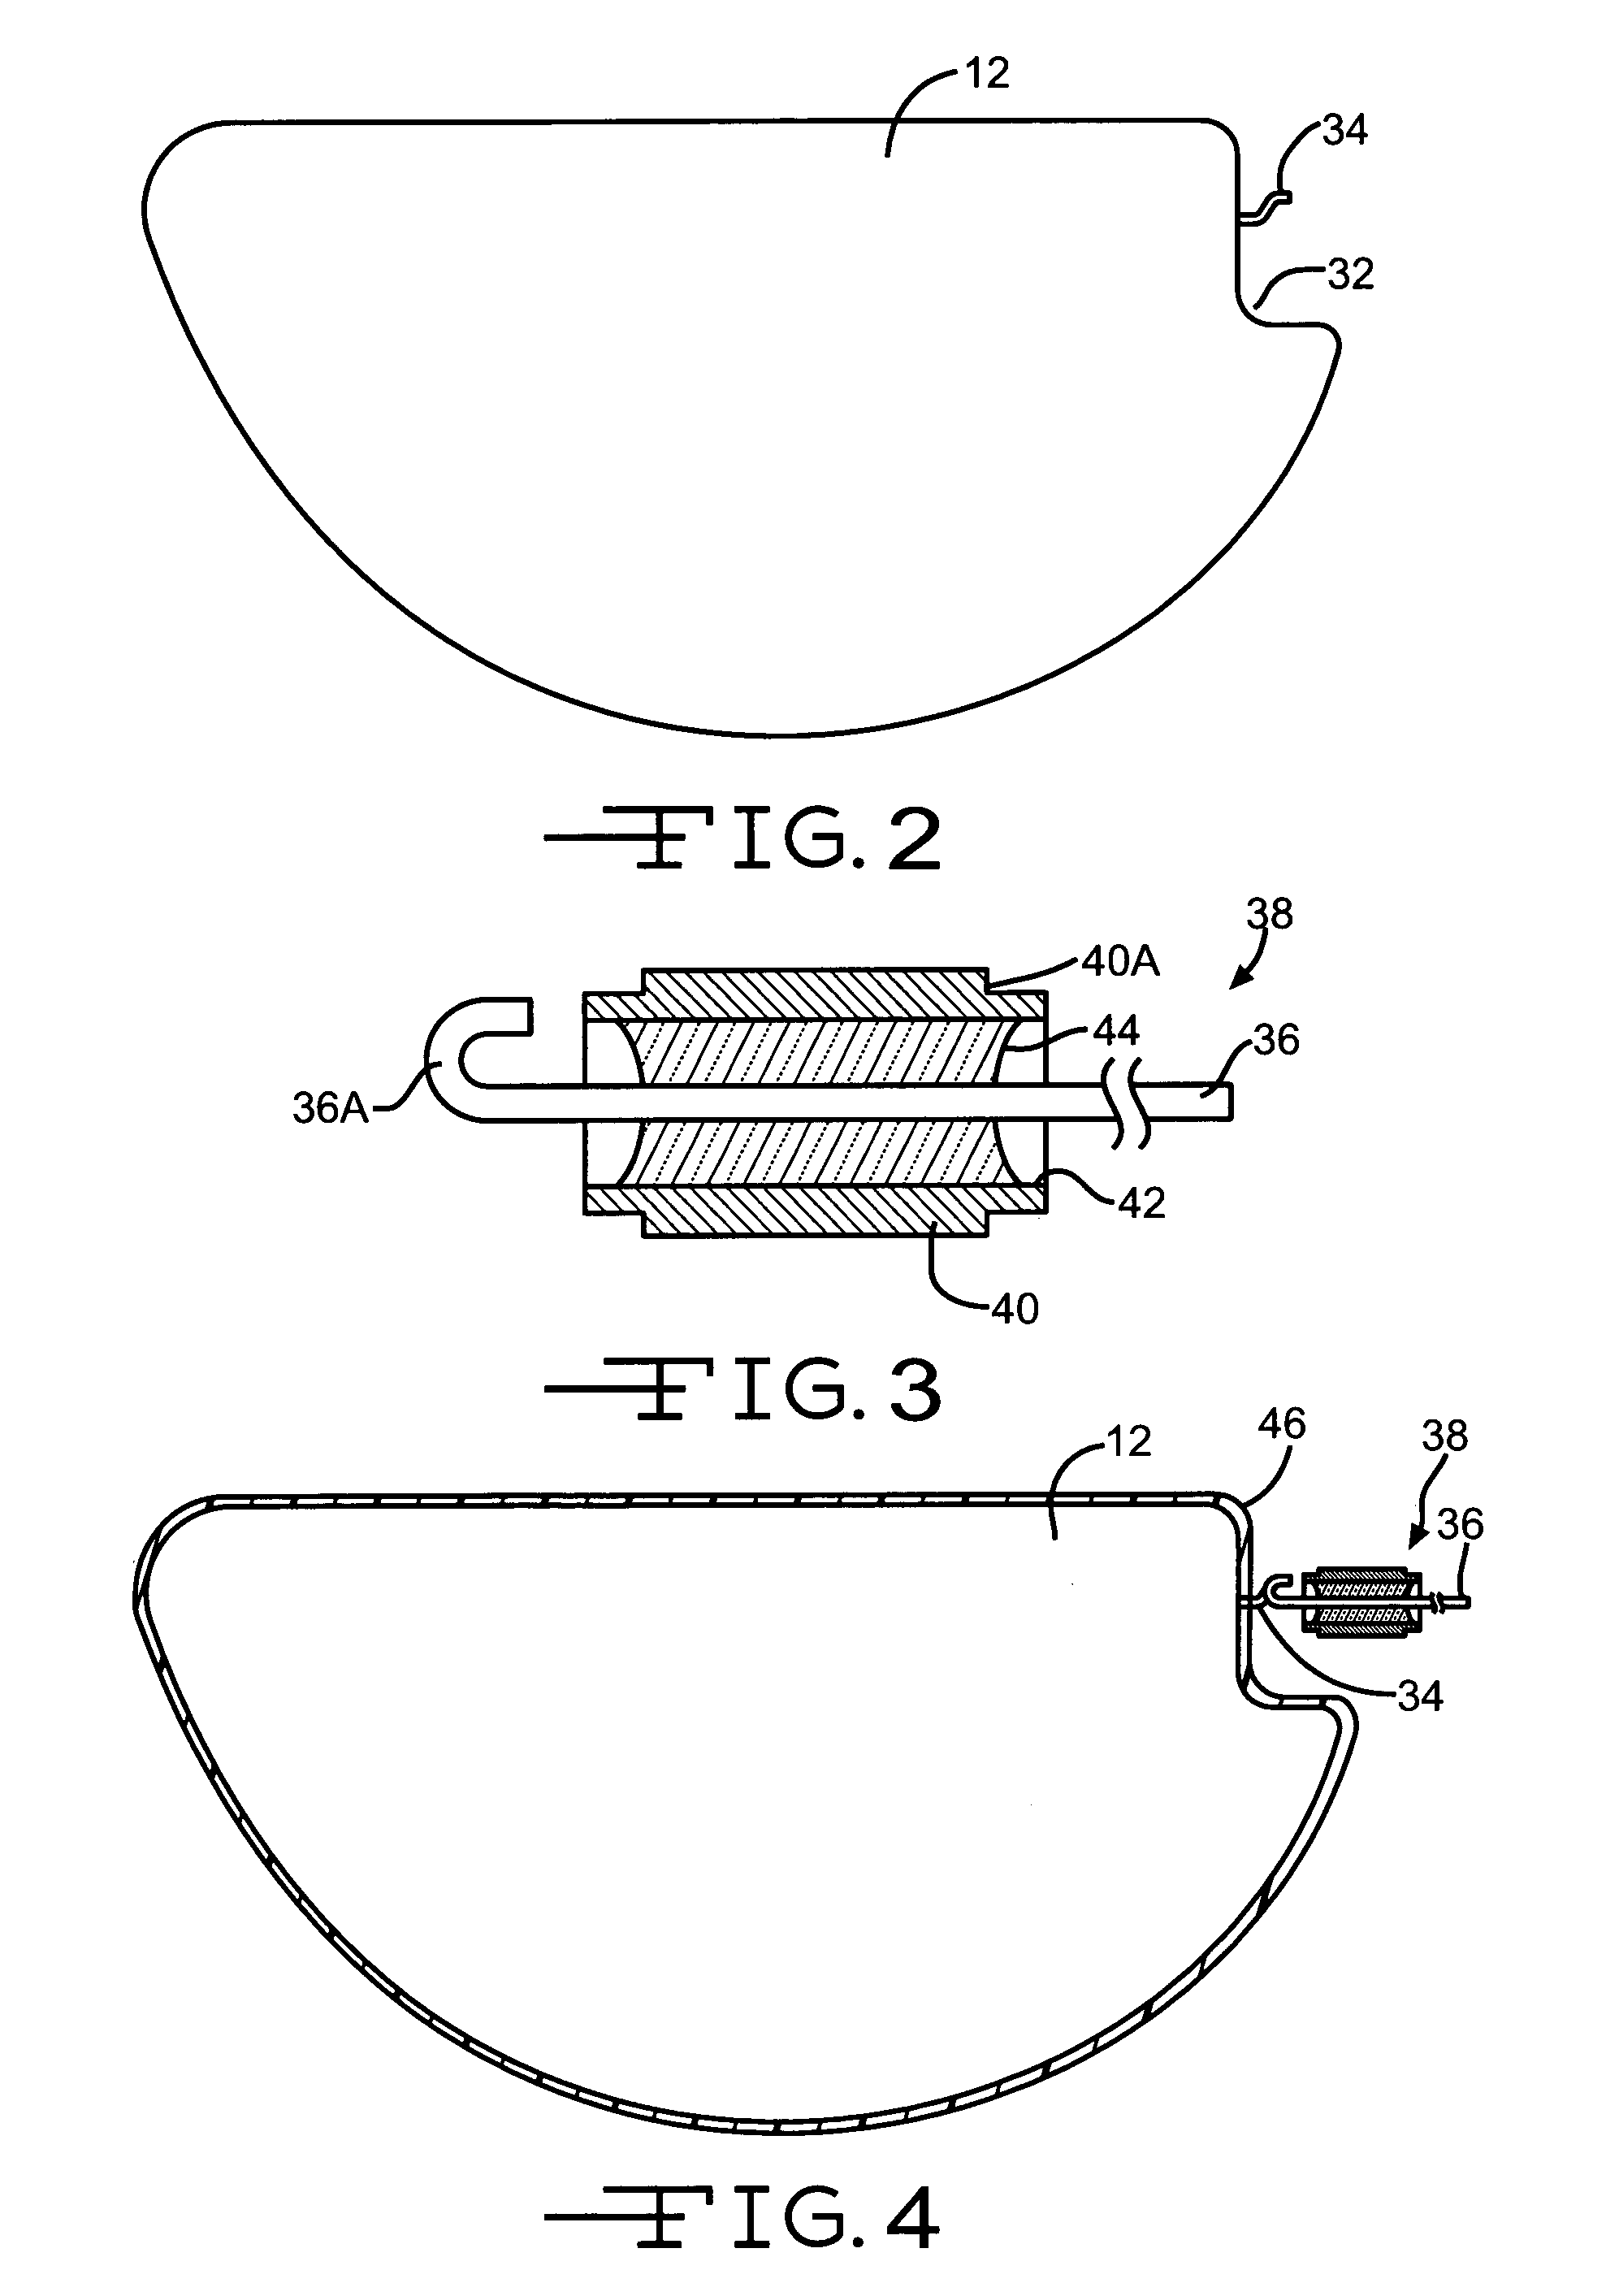 Molded polymeric cradle for containing an anode in an electrolytic capacitor from high shock and vibration conditions